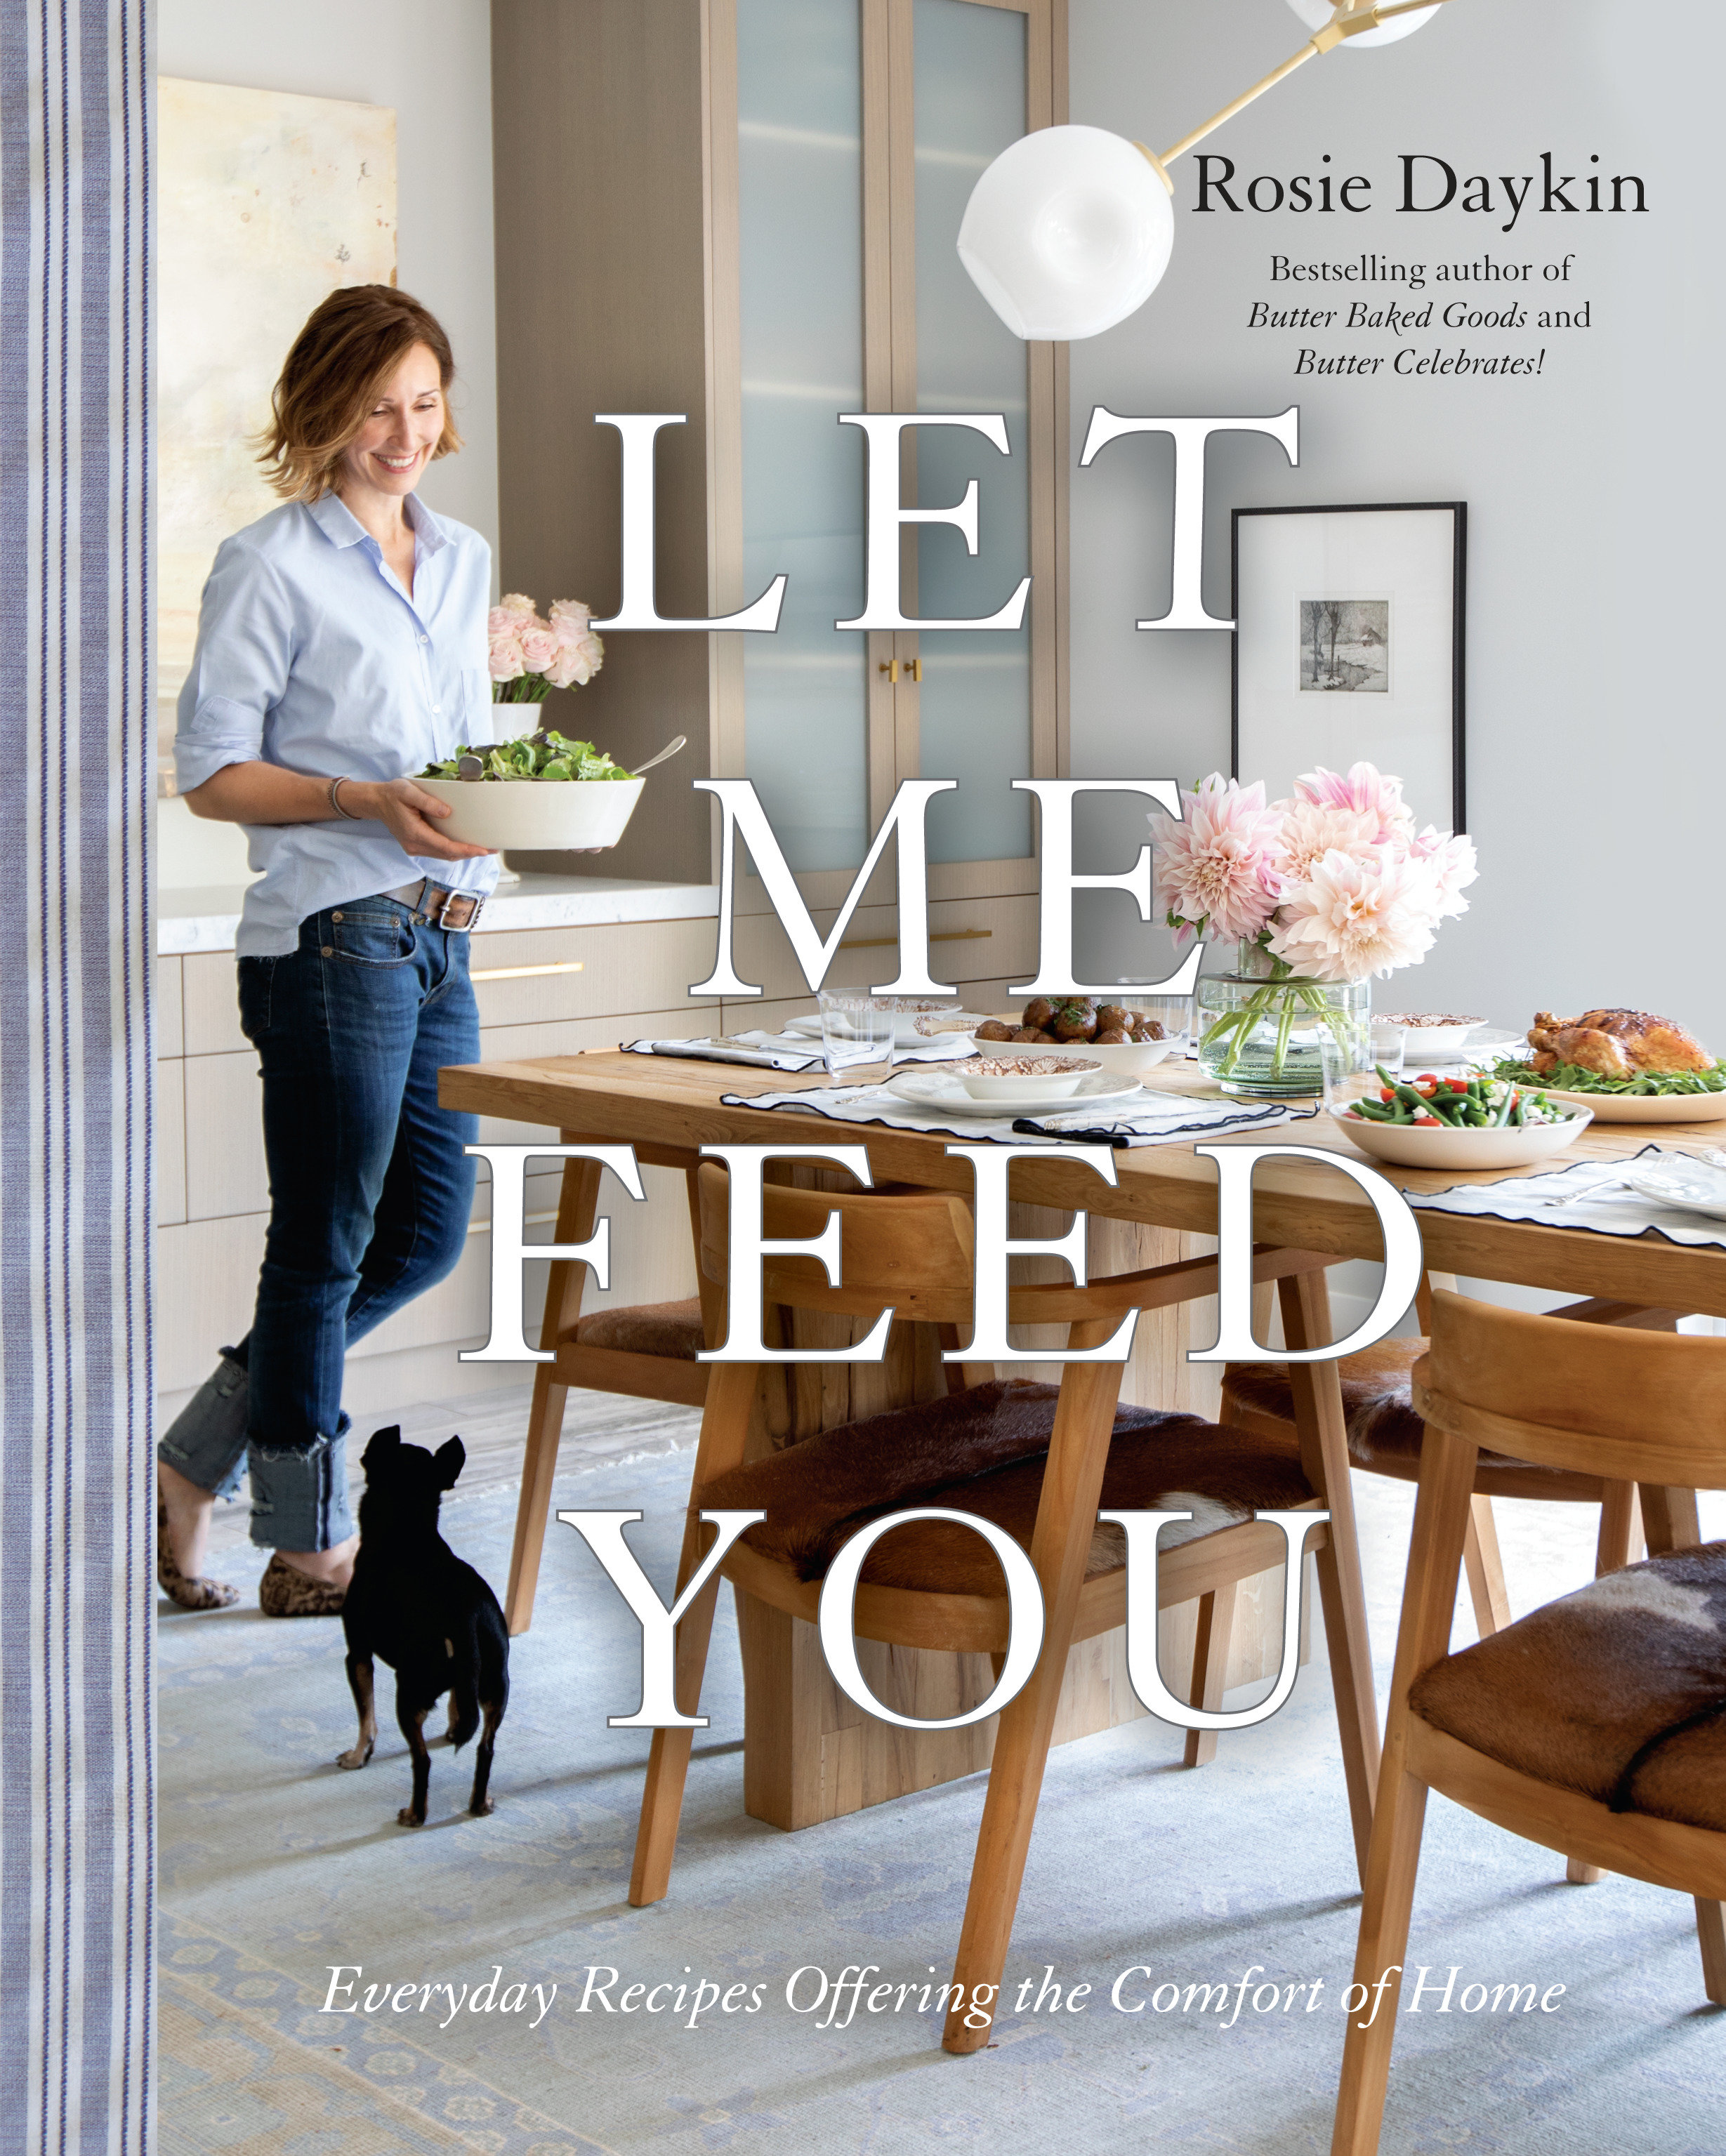 Let Me Feed You (Hardcover Book)